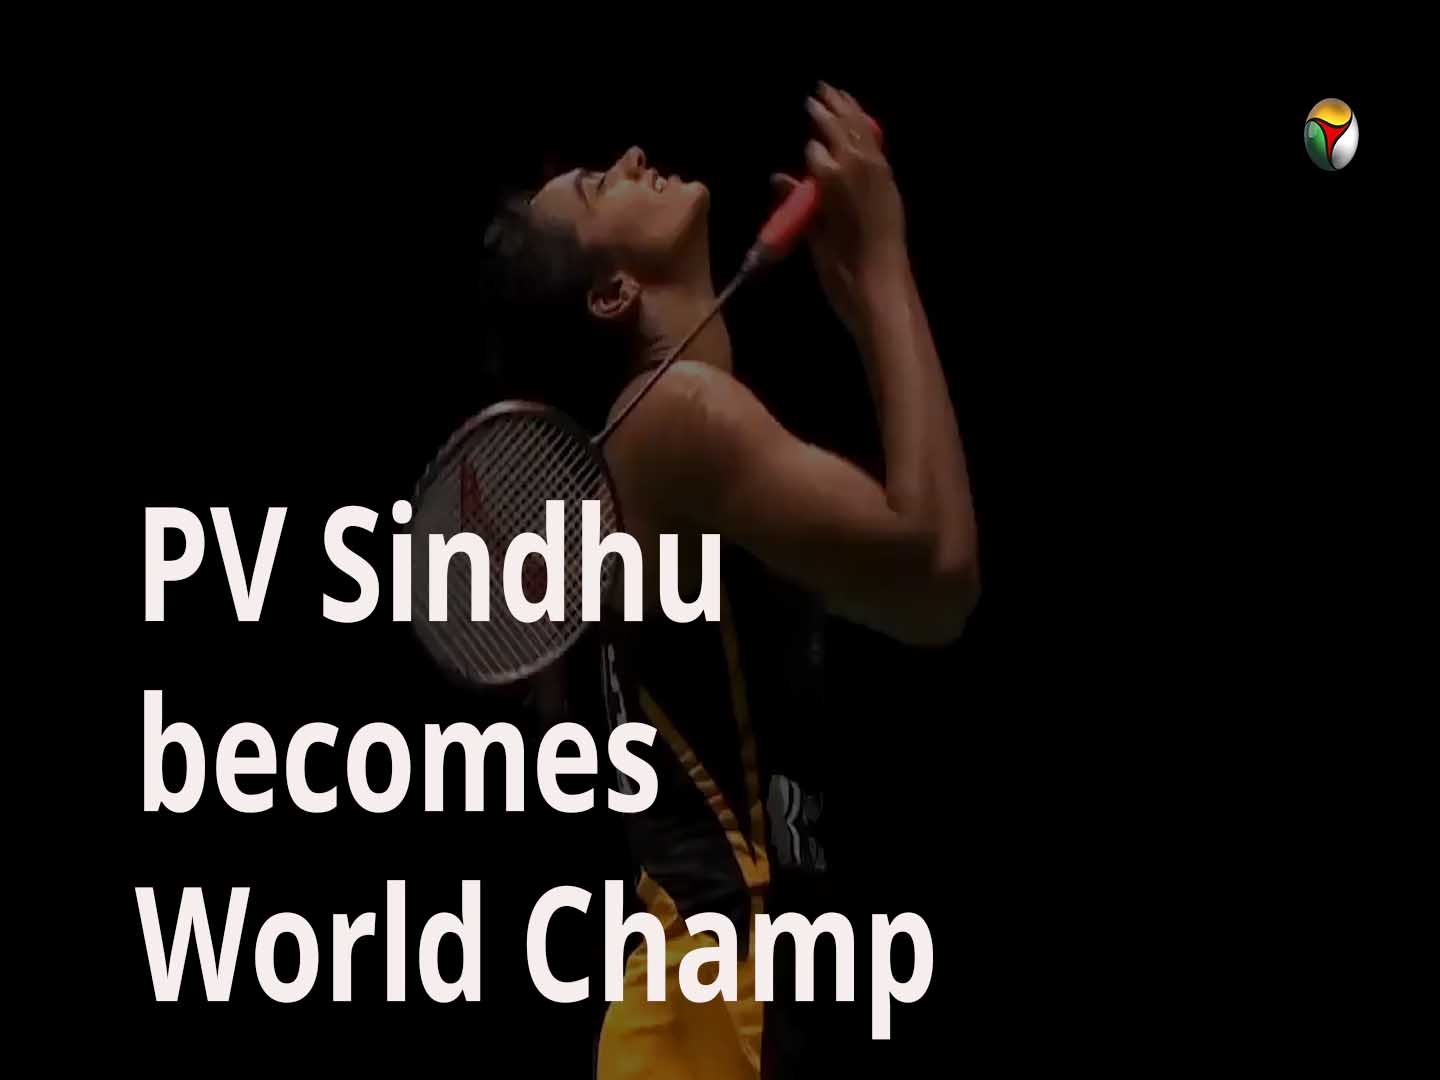 PV Sindhu becomes first Indian to win Badminton World Championship